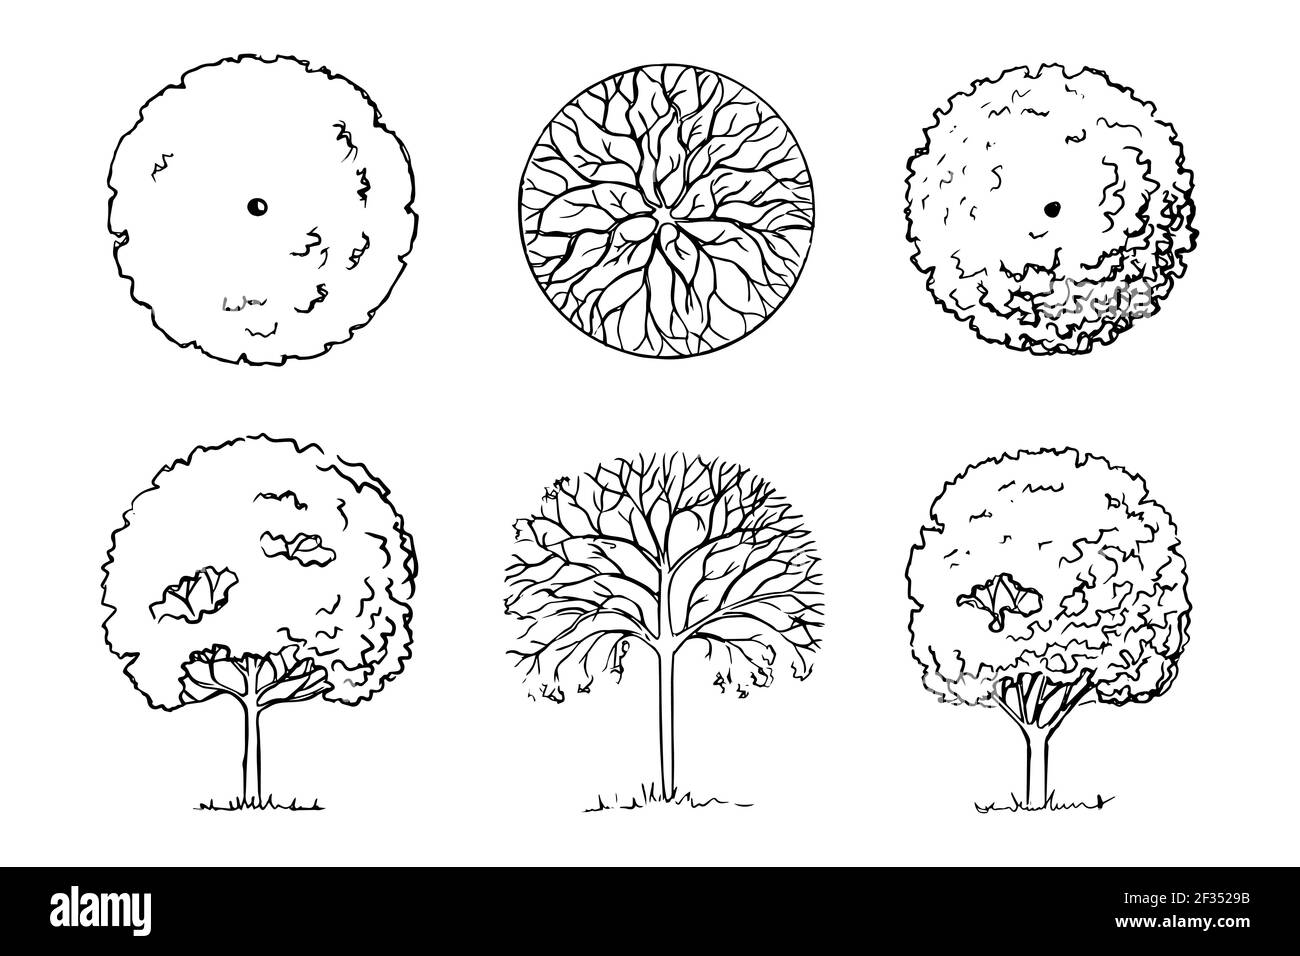 Hand-drawn sketch of trees. Landscaping. Three deciduous garden ...